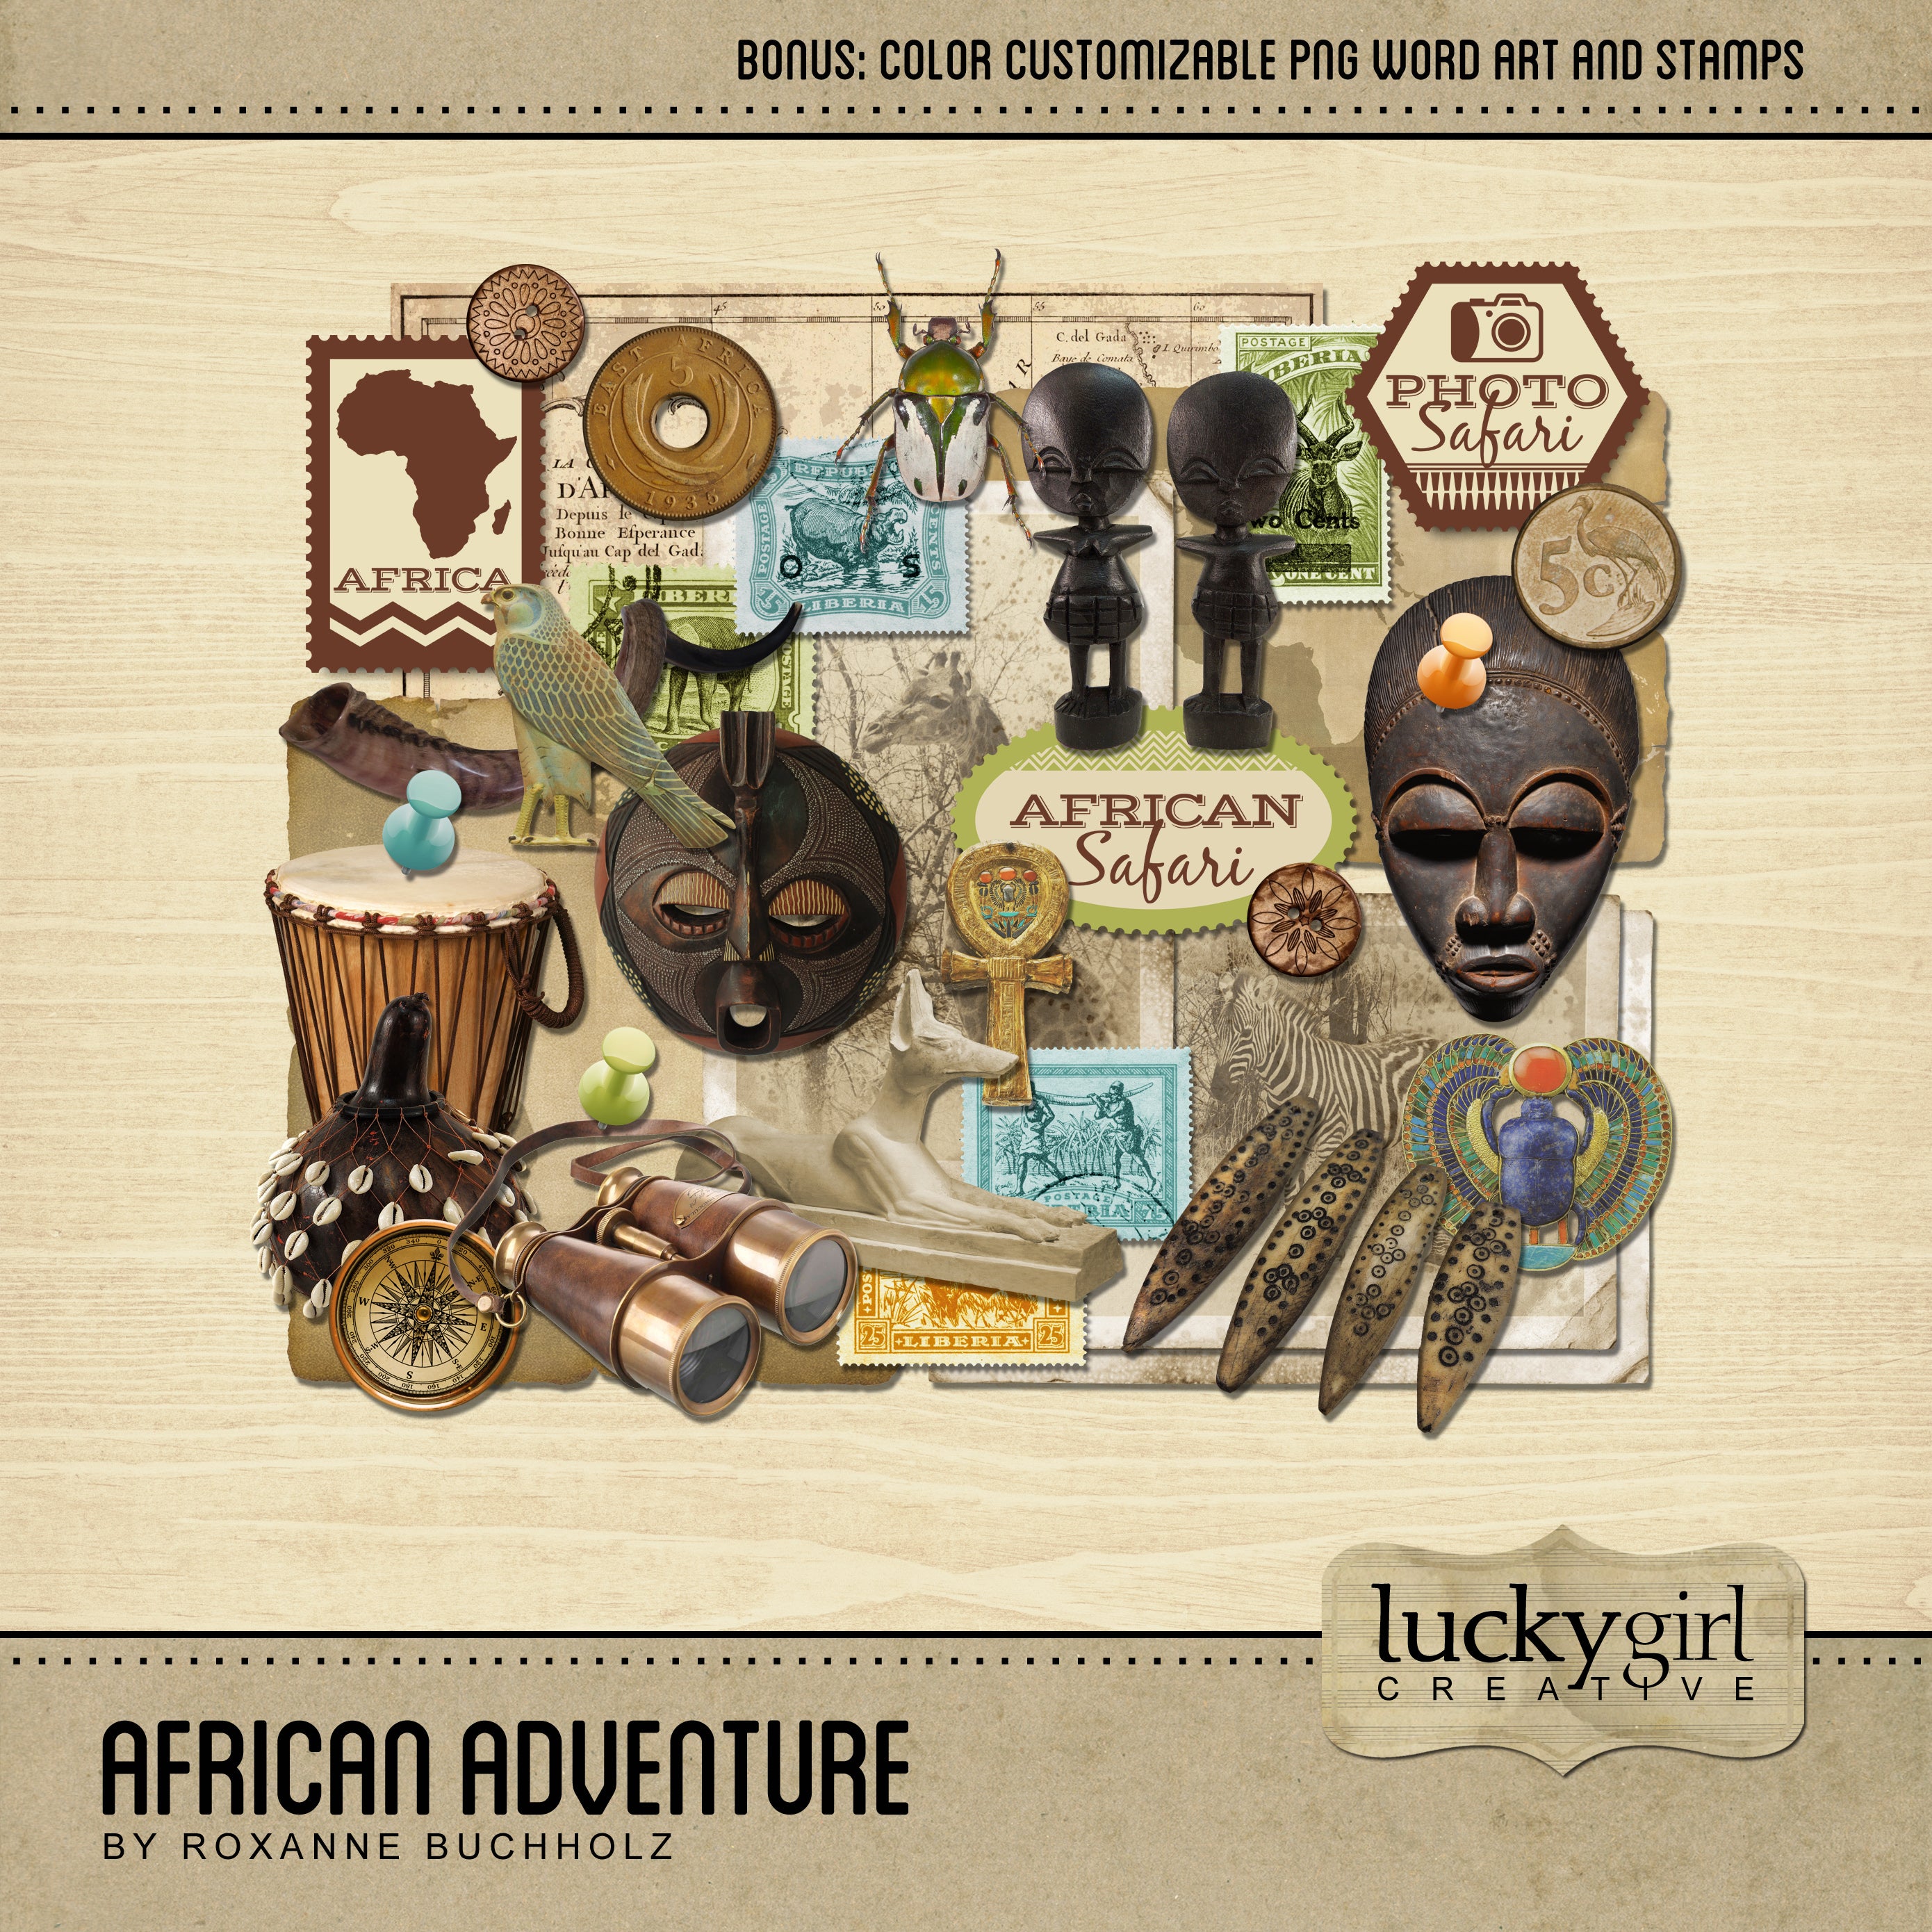 African Adventure Digital Scrapbook Kit is a diverse collection of African digital art embellishments, artifacts, and color-customizable .png word art pieces. If you have been meaning to document your memories from a trip to Africa or are planning a trip there soon, this collection is just what you need! 